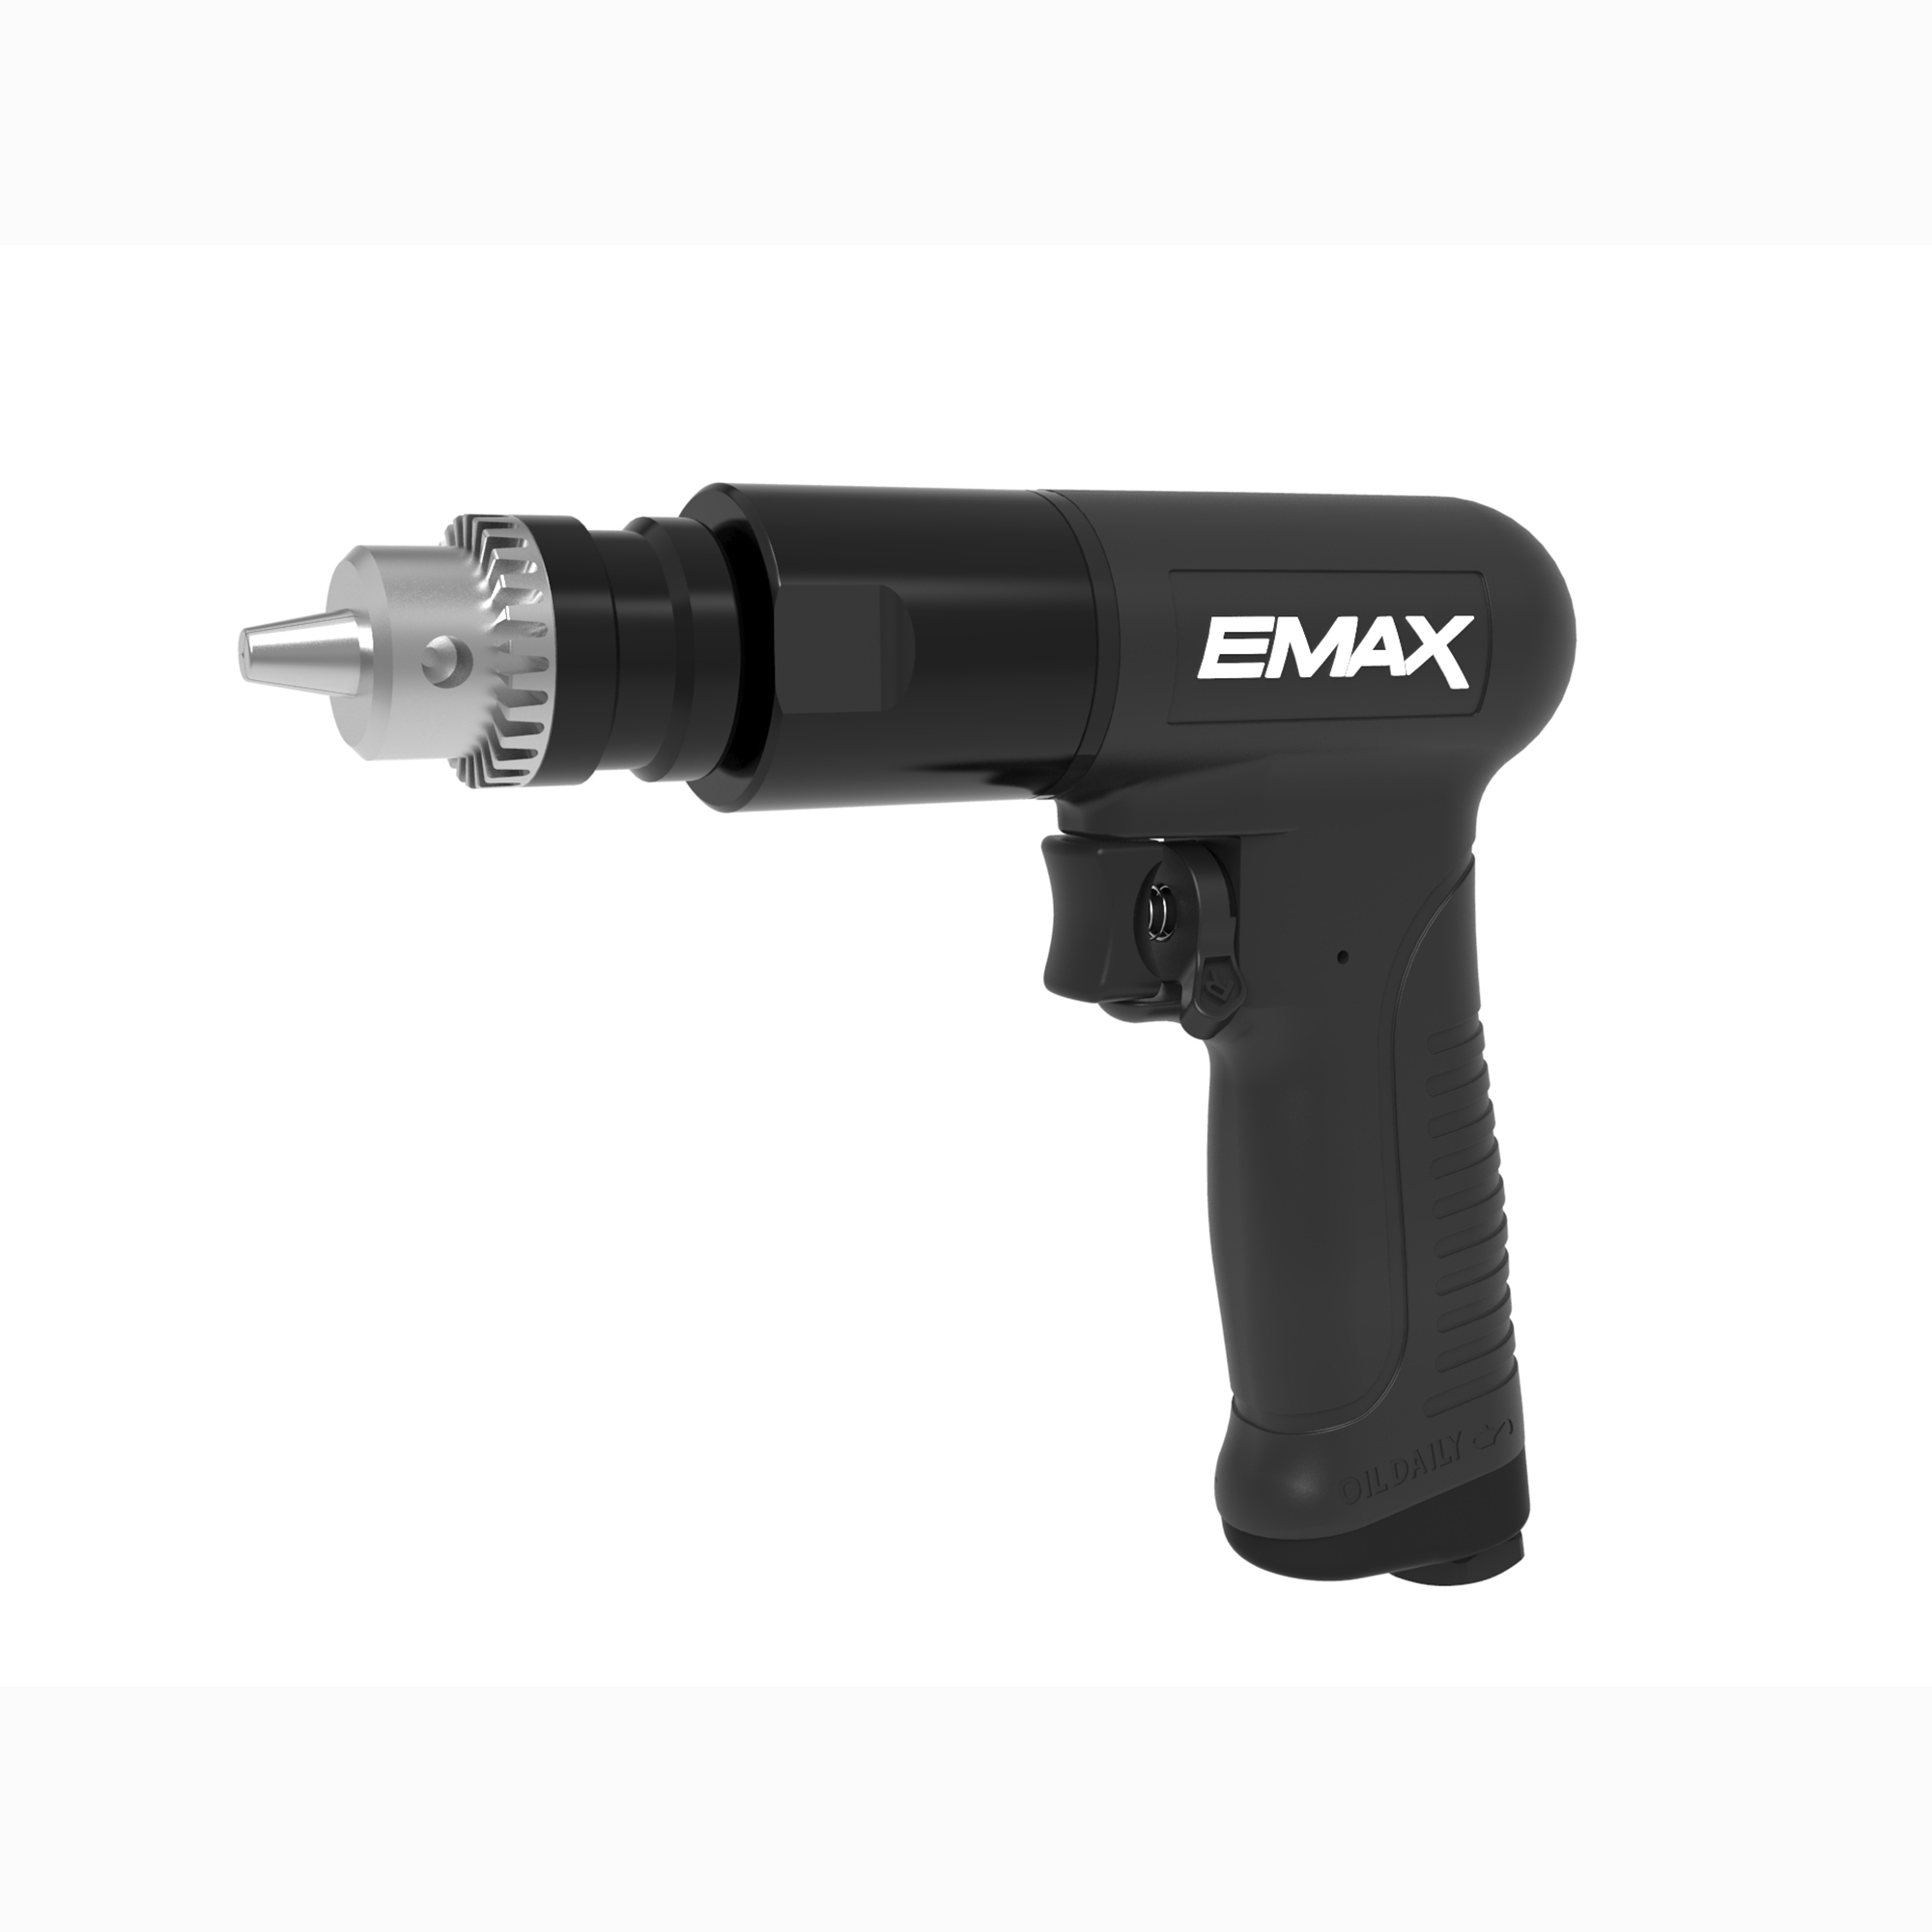 Emax, Composite 3/8Inch Reversible Air Drill-2100RPM, Chuck Size 3/8 in, Tool Length 7 in, Max. RPM 2200 Model EATDR03S1P